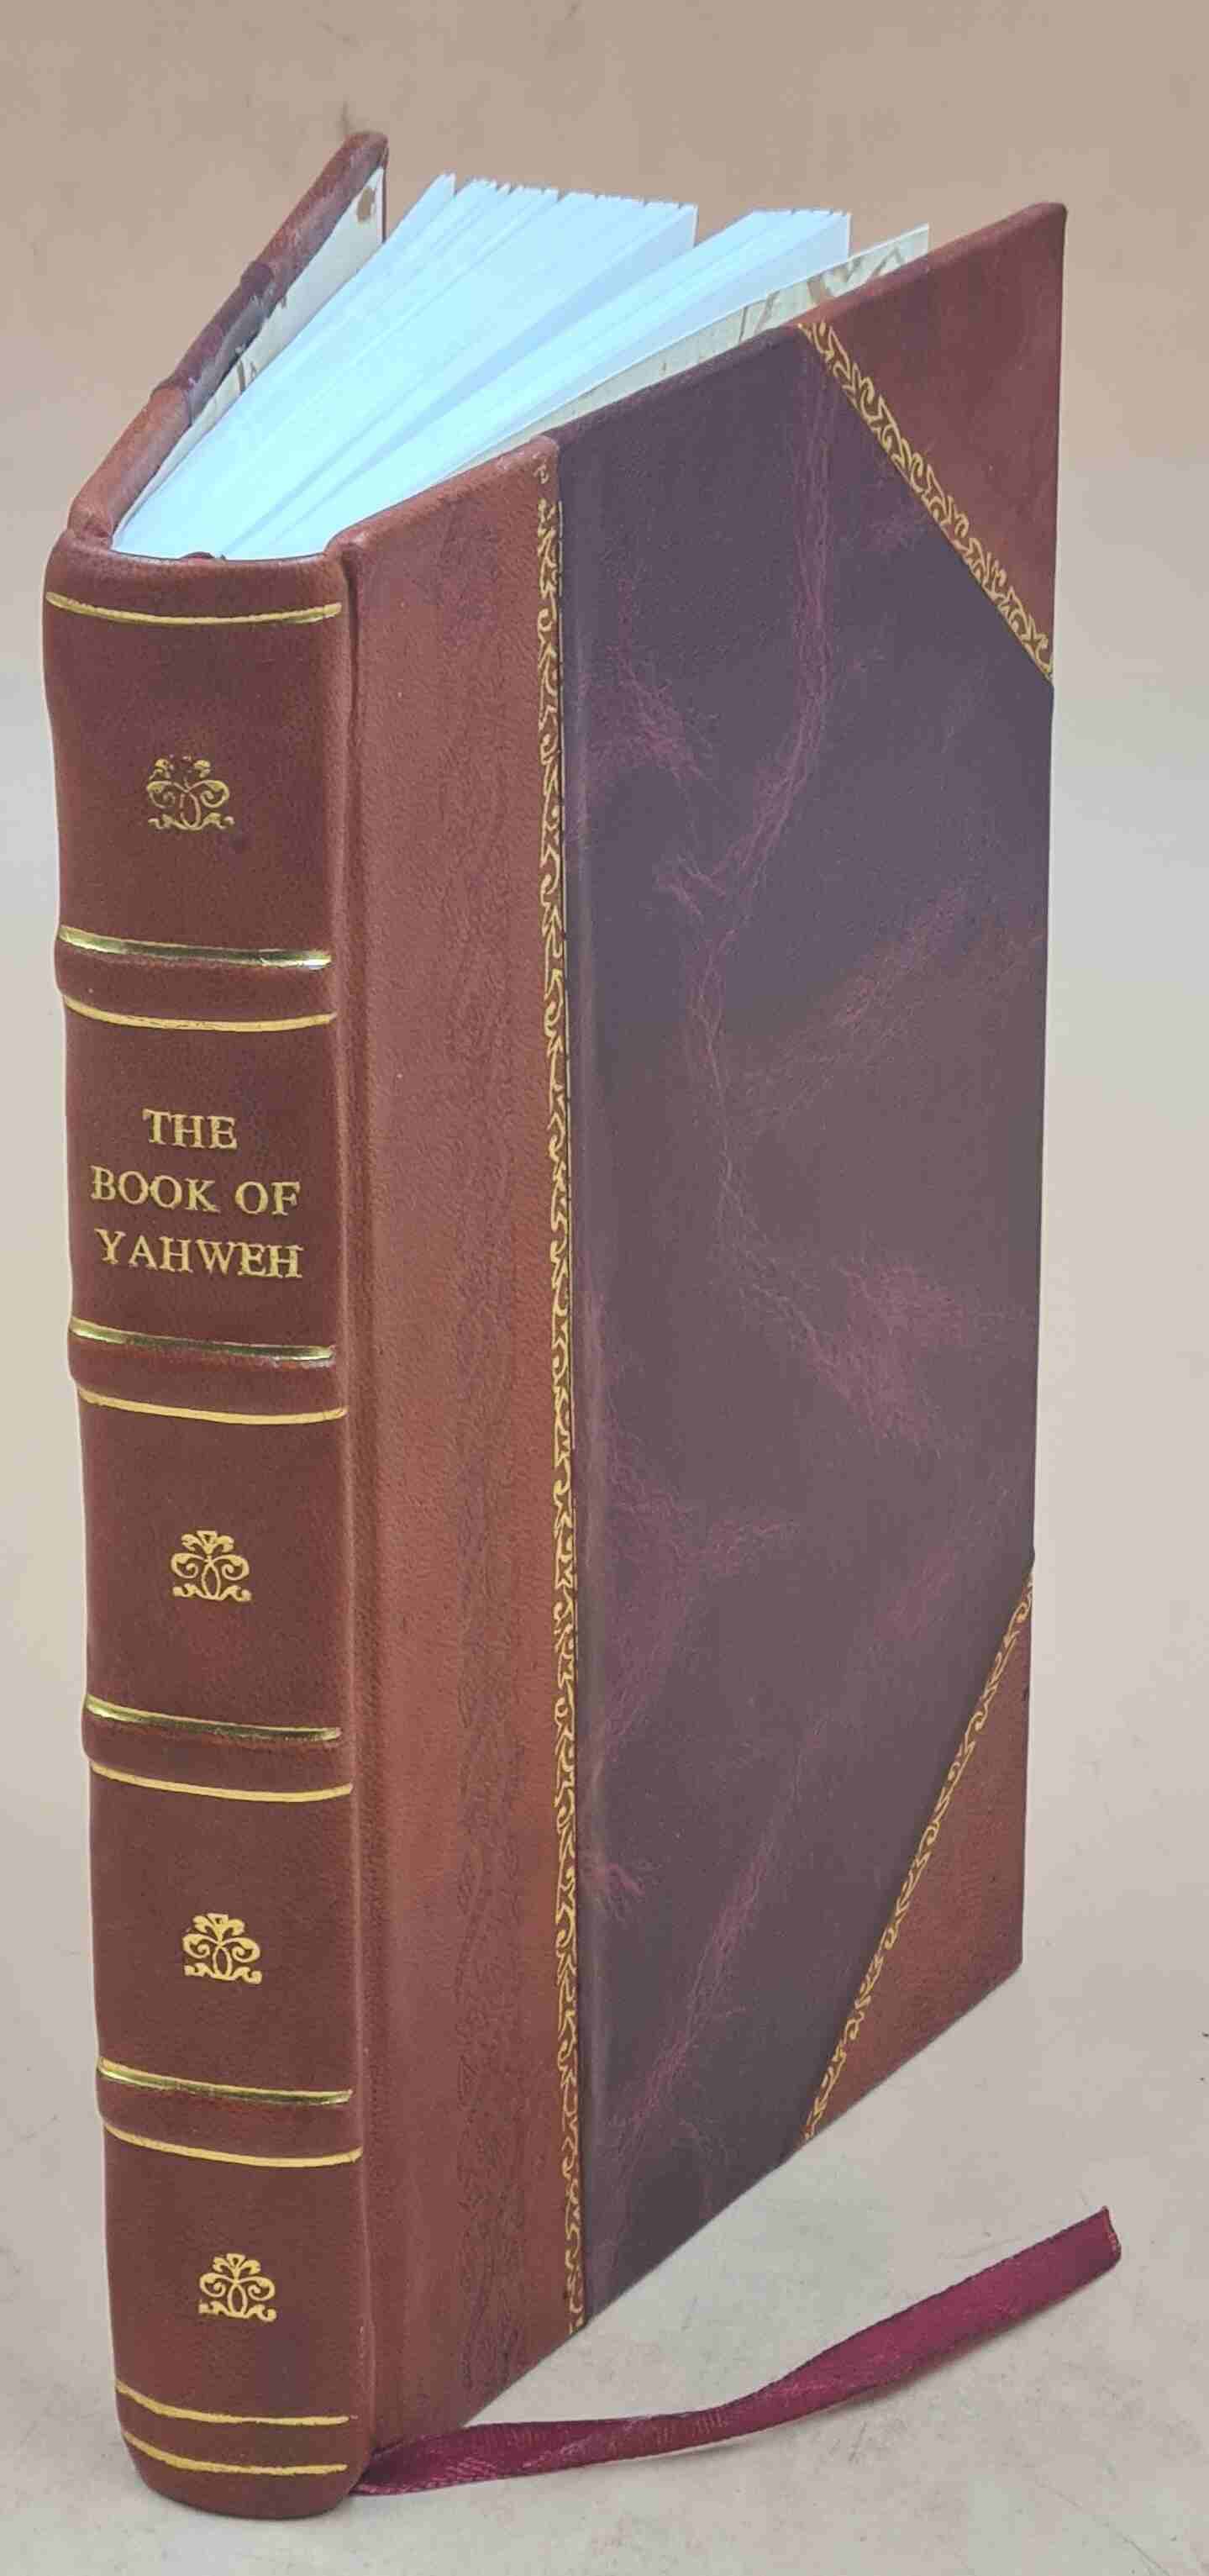 The book of Yahweh (The Yahwist Bible) 1922 [Leather Bound]